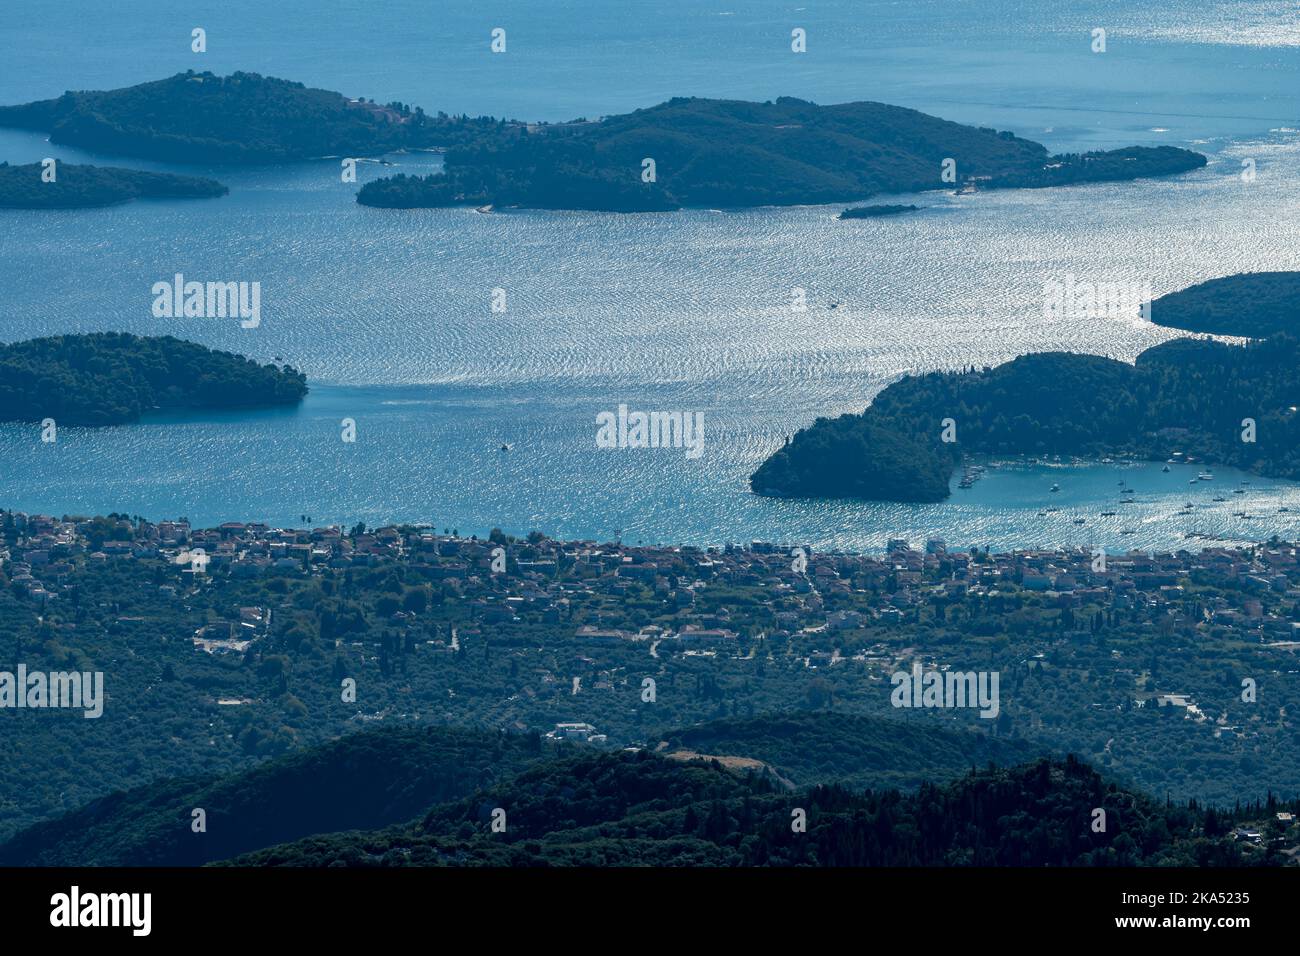 Aerial view of a seaside town with nearby islands. Stock Photo